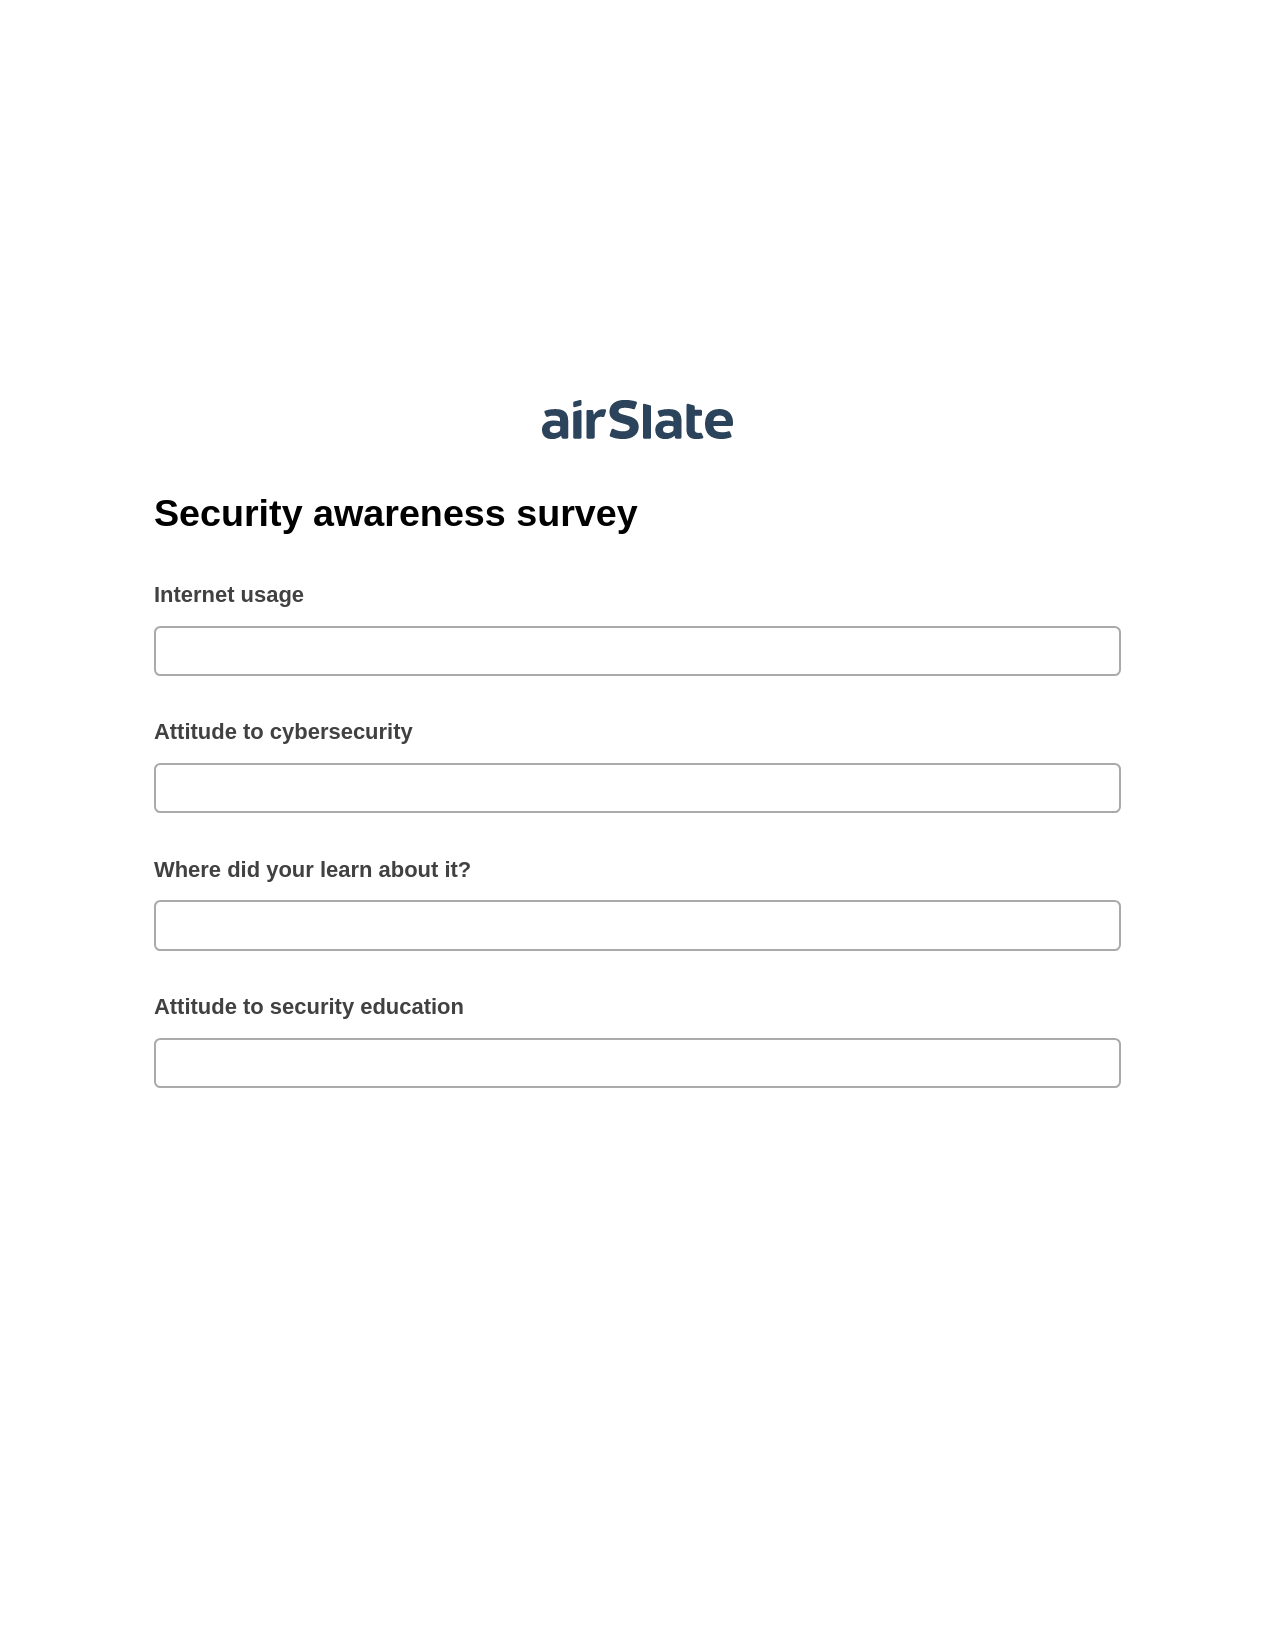 Multirole Security awareness survey Pre-fill from Excel Spreadsheet Bot, Mailchimp add recipient to audience Bot, Archive to SharePoint Folder Bot